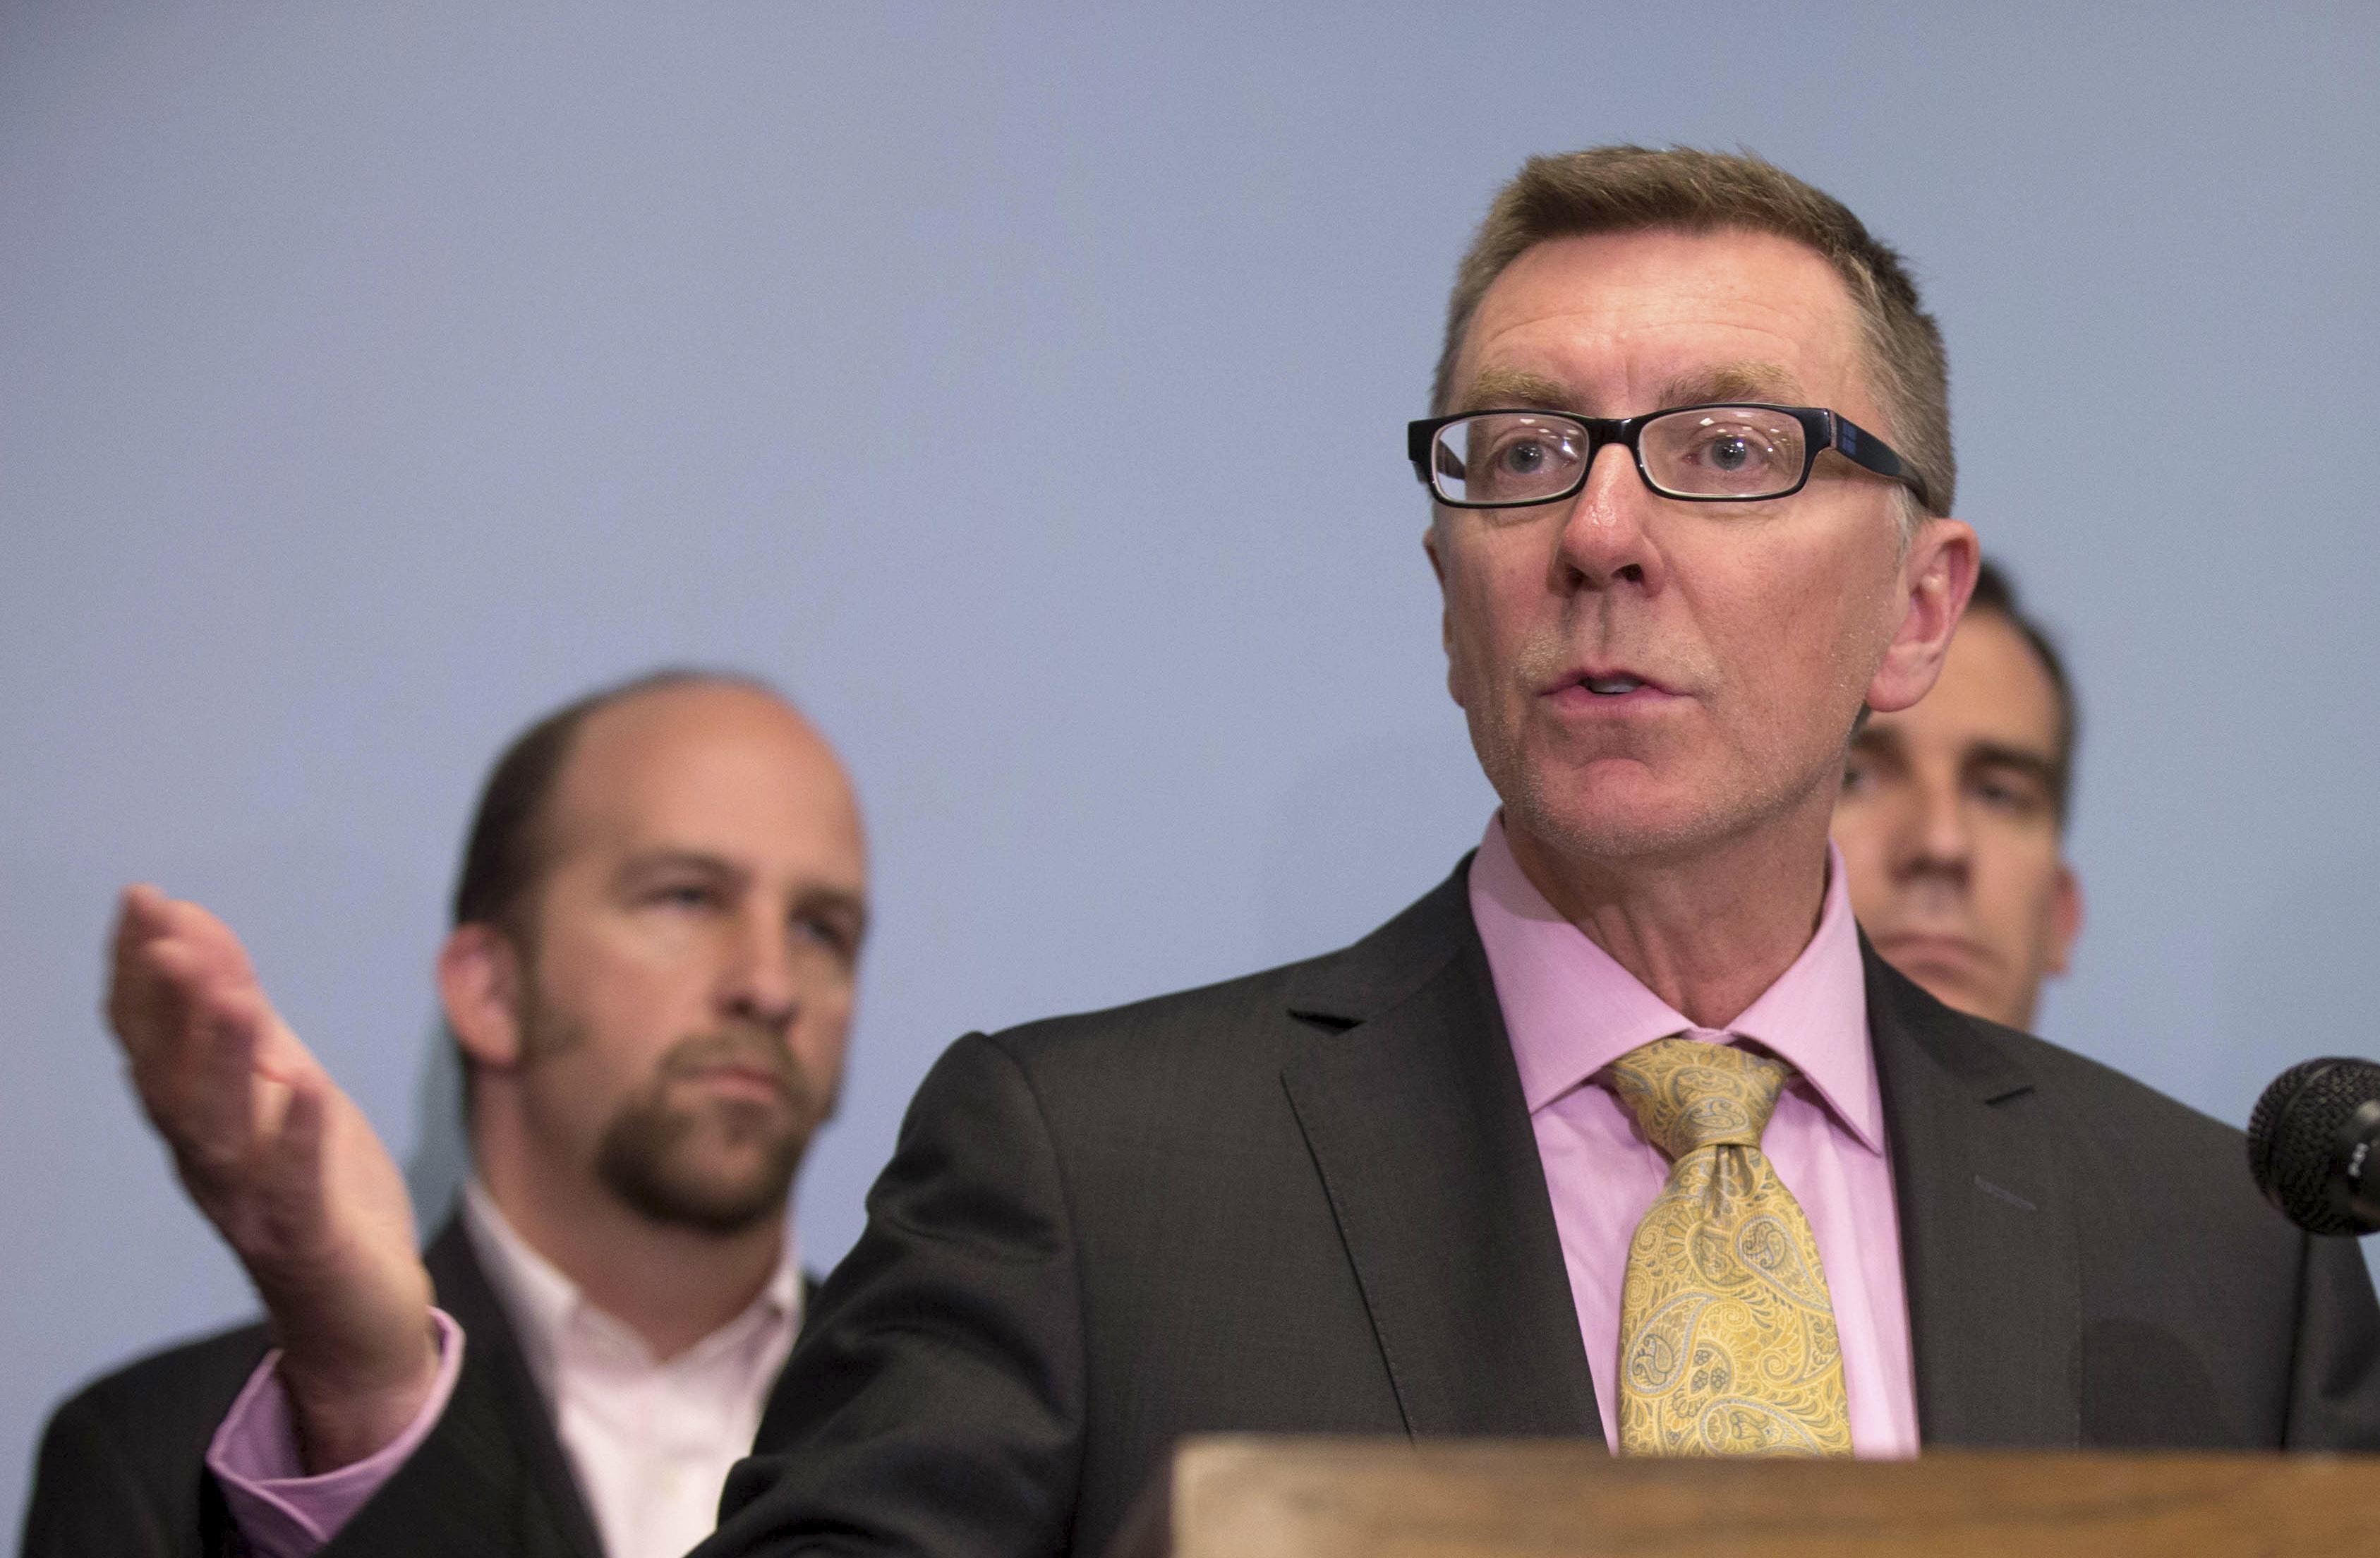 John Deasy resigned as superintendent of the Los Angeles Unified School District on Oct. 16, 2014. (Lucy Nicholson—Reuters)